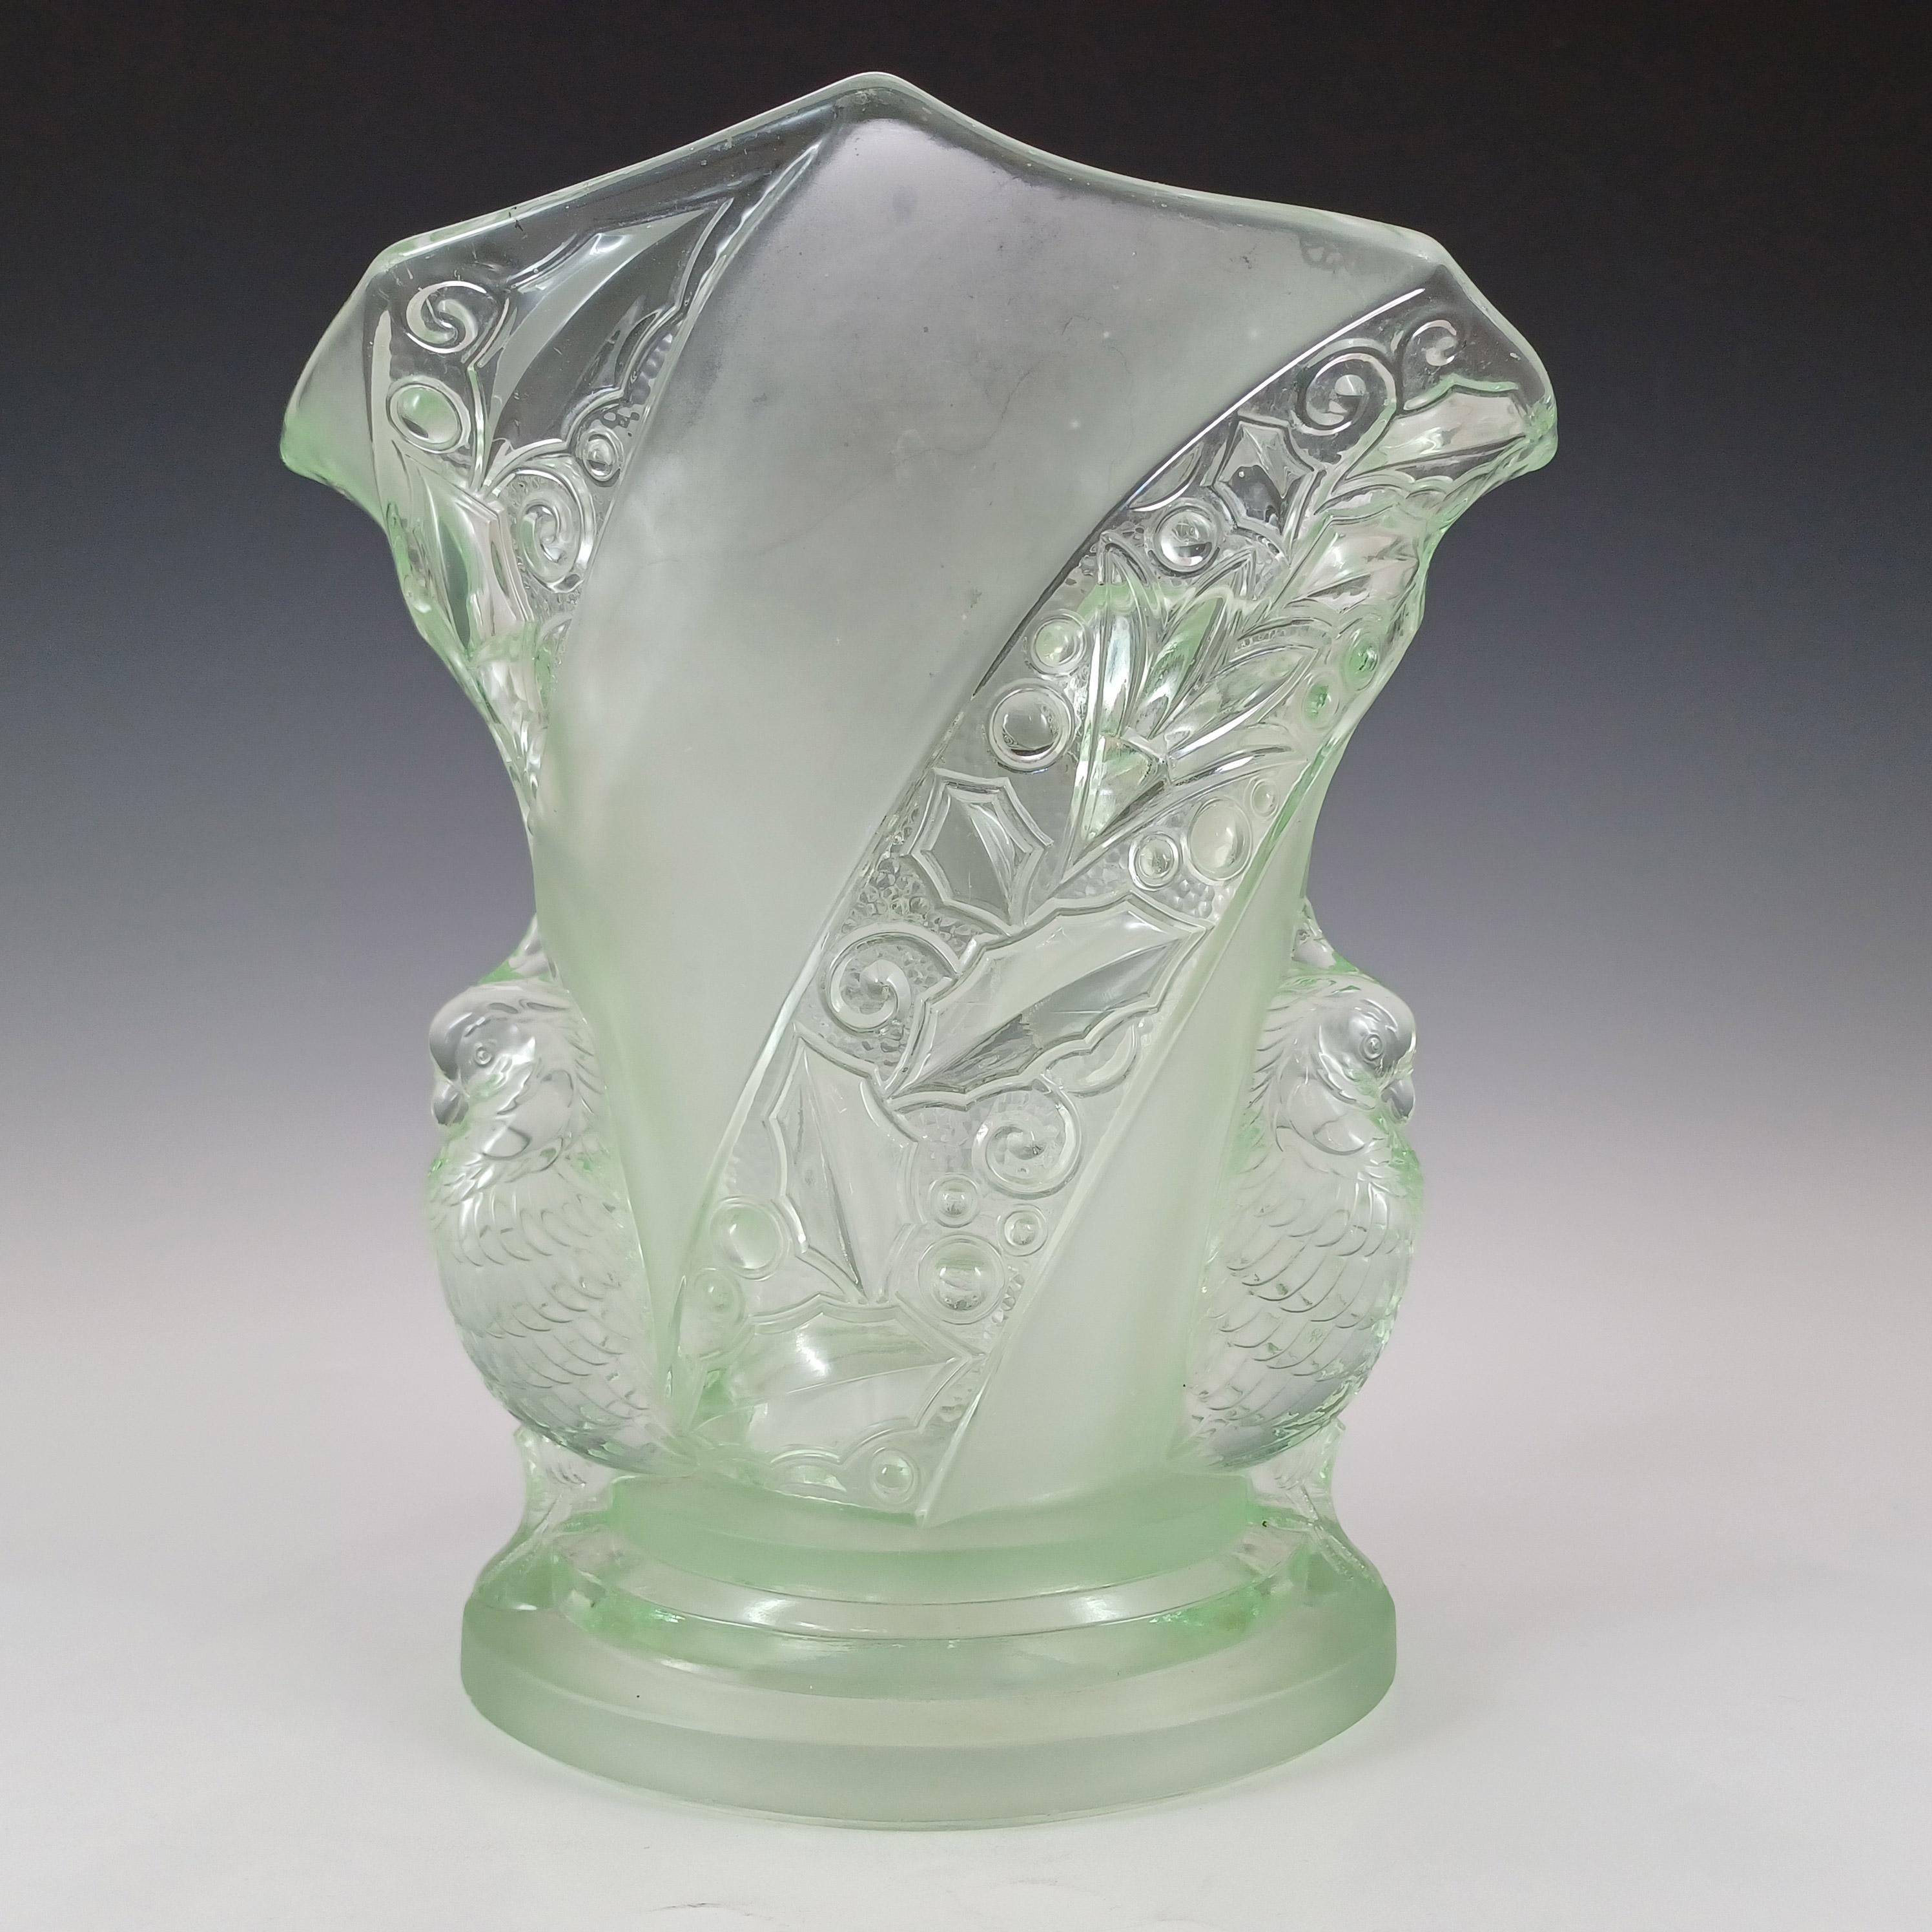 A wonderful large and heavy (1.3 kilos unpacked) art deco green glass 'Parakeet' bird vase. Made by German company Brockwitz in the 1930's/40's, pattern number 6925, and is featured in their 1941 product catalogue. Made in uranium green glass, which